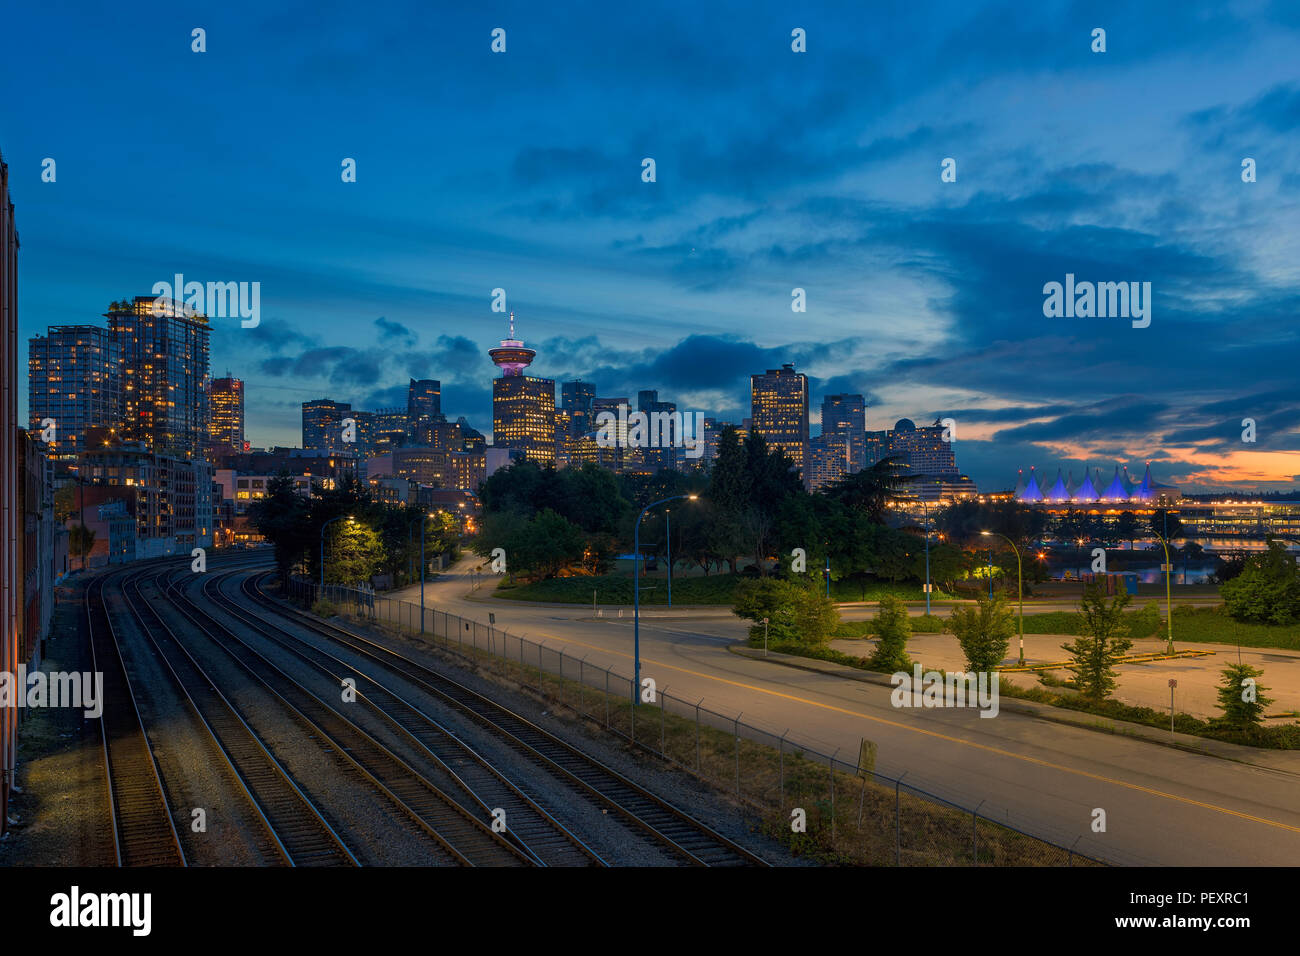 Vancouver BC British Columbia Canada downtown city skyline by railroad tracks during evening blue hour after sunset Stock Photo